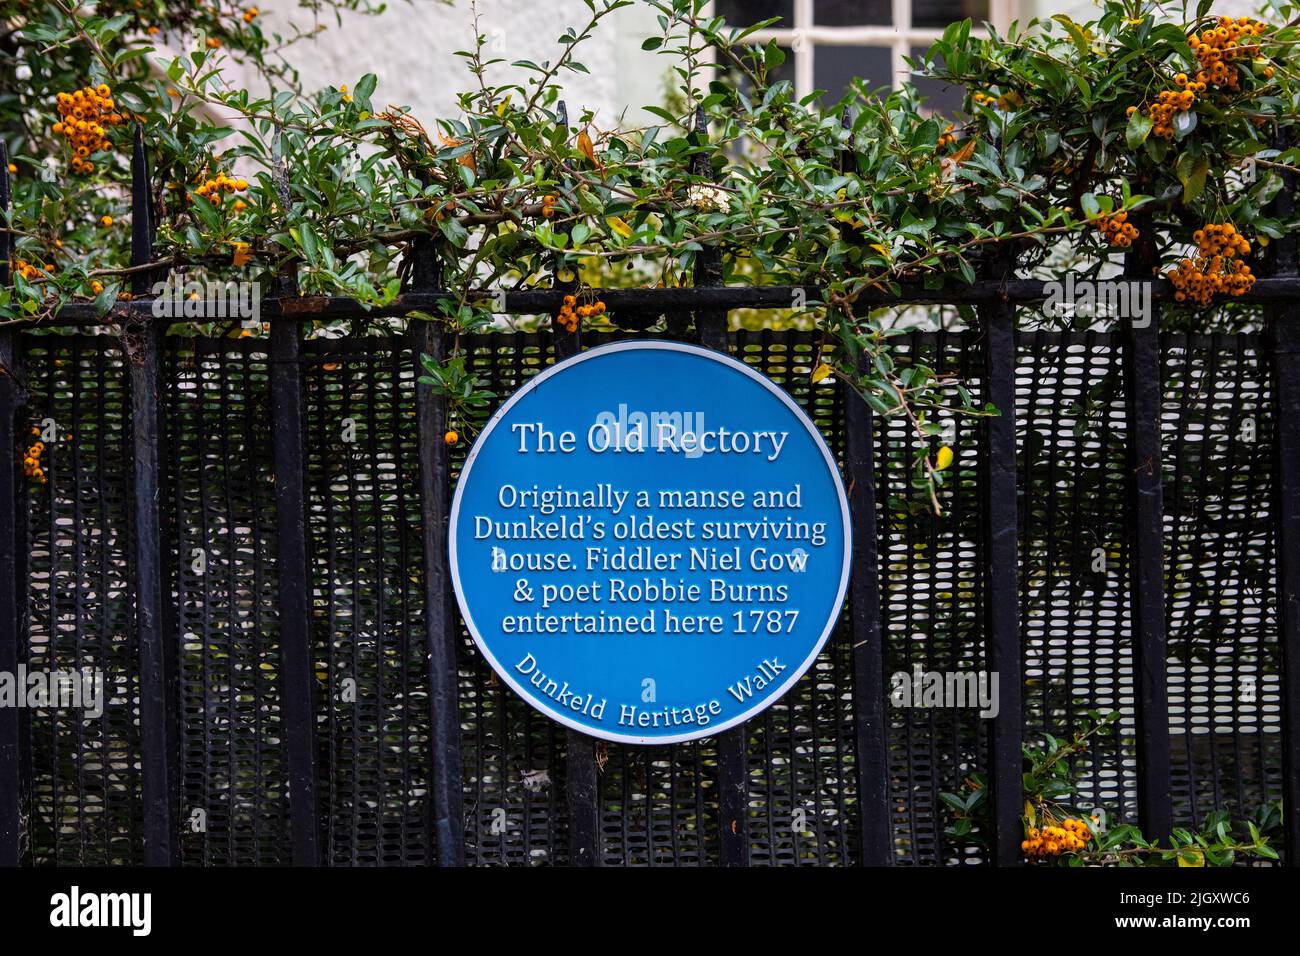 Dunkeld, Scotland - October 11th 2021: A blue plaque noting the history of The Old Rectory in the beautiful town of Dunkeld, Scotland. Stock Photo